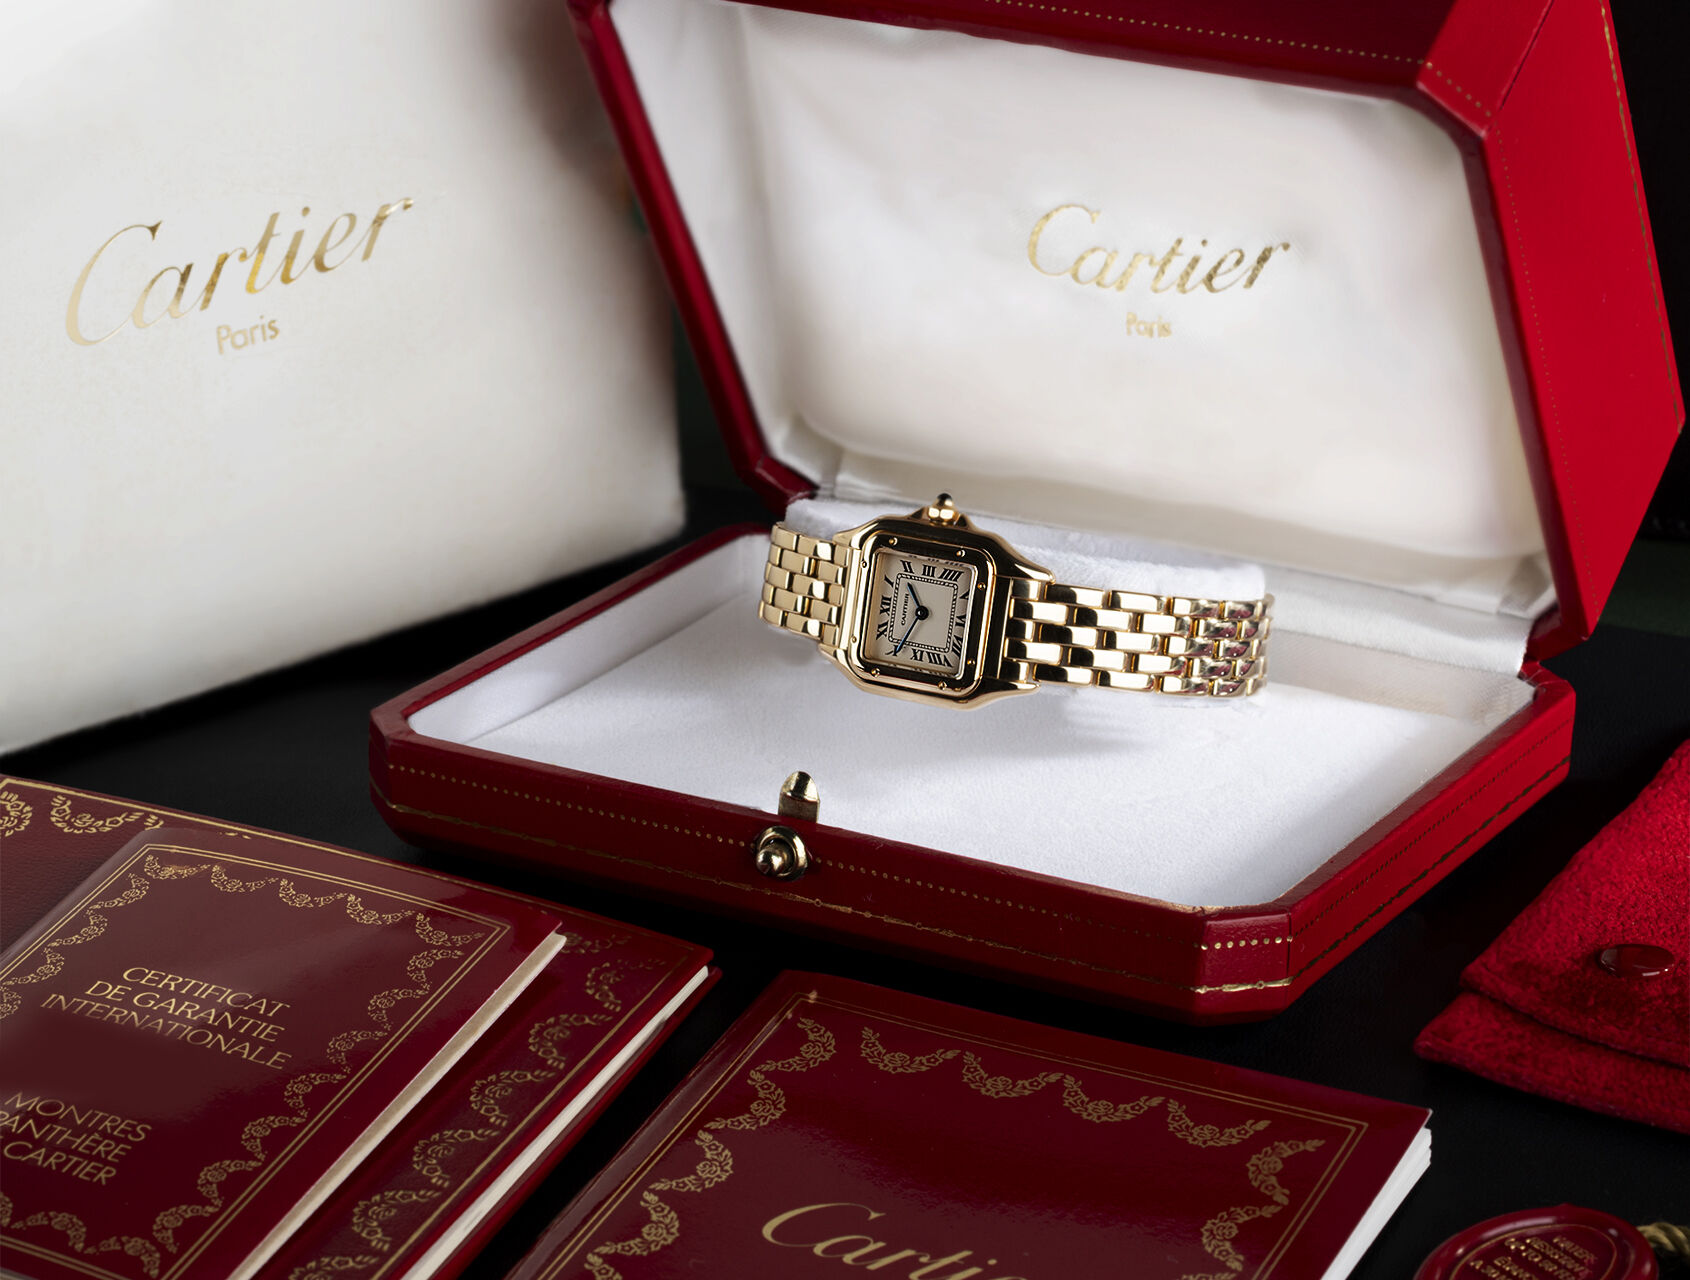 ref W25022B901 | 1070 - Yellow Gold | Cartier Lady Panthere